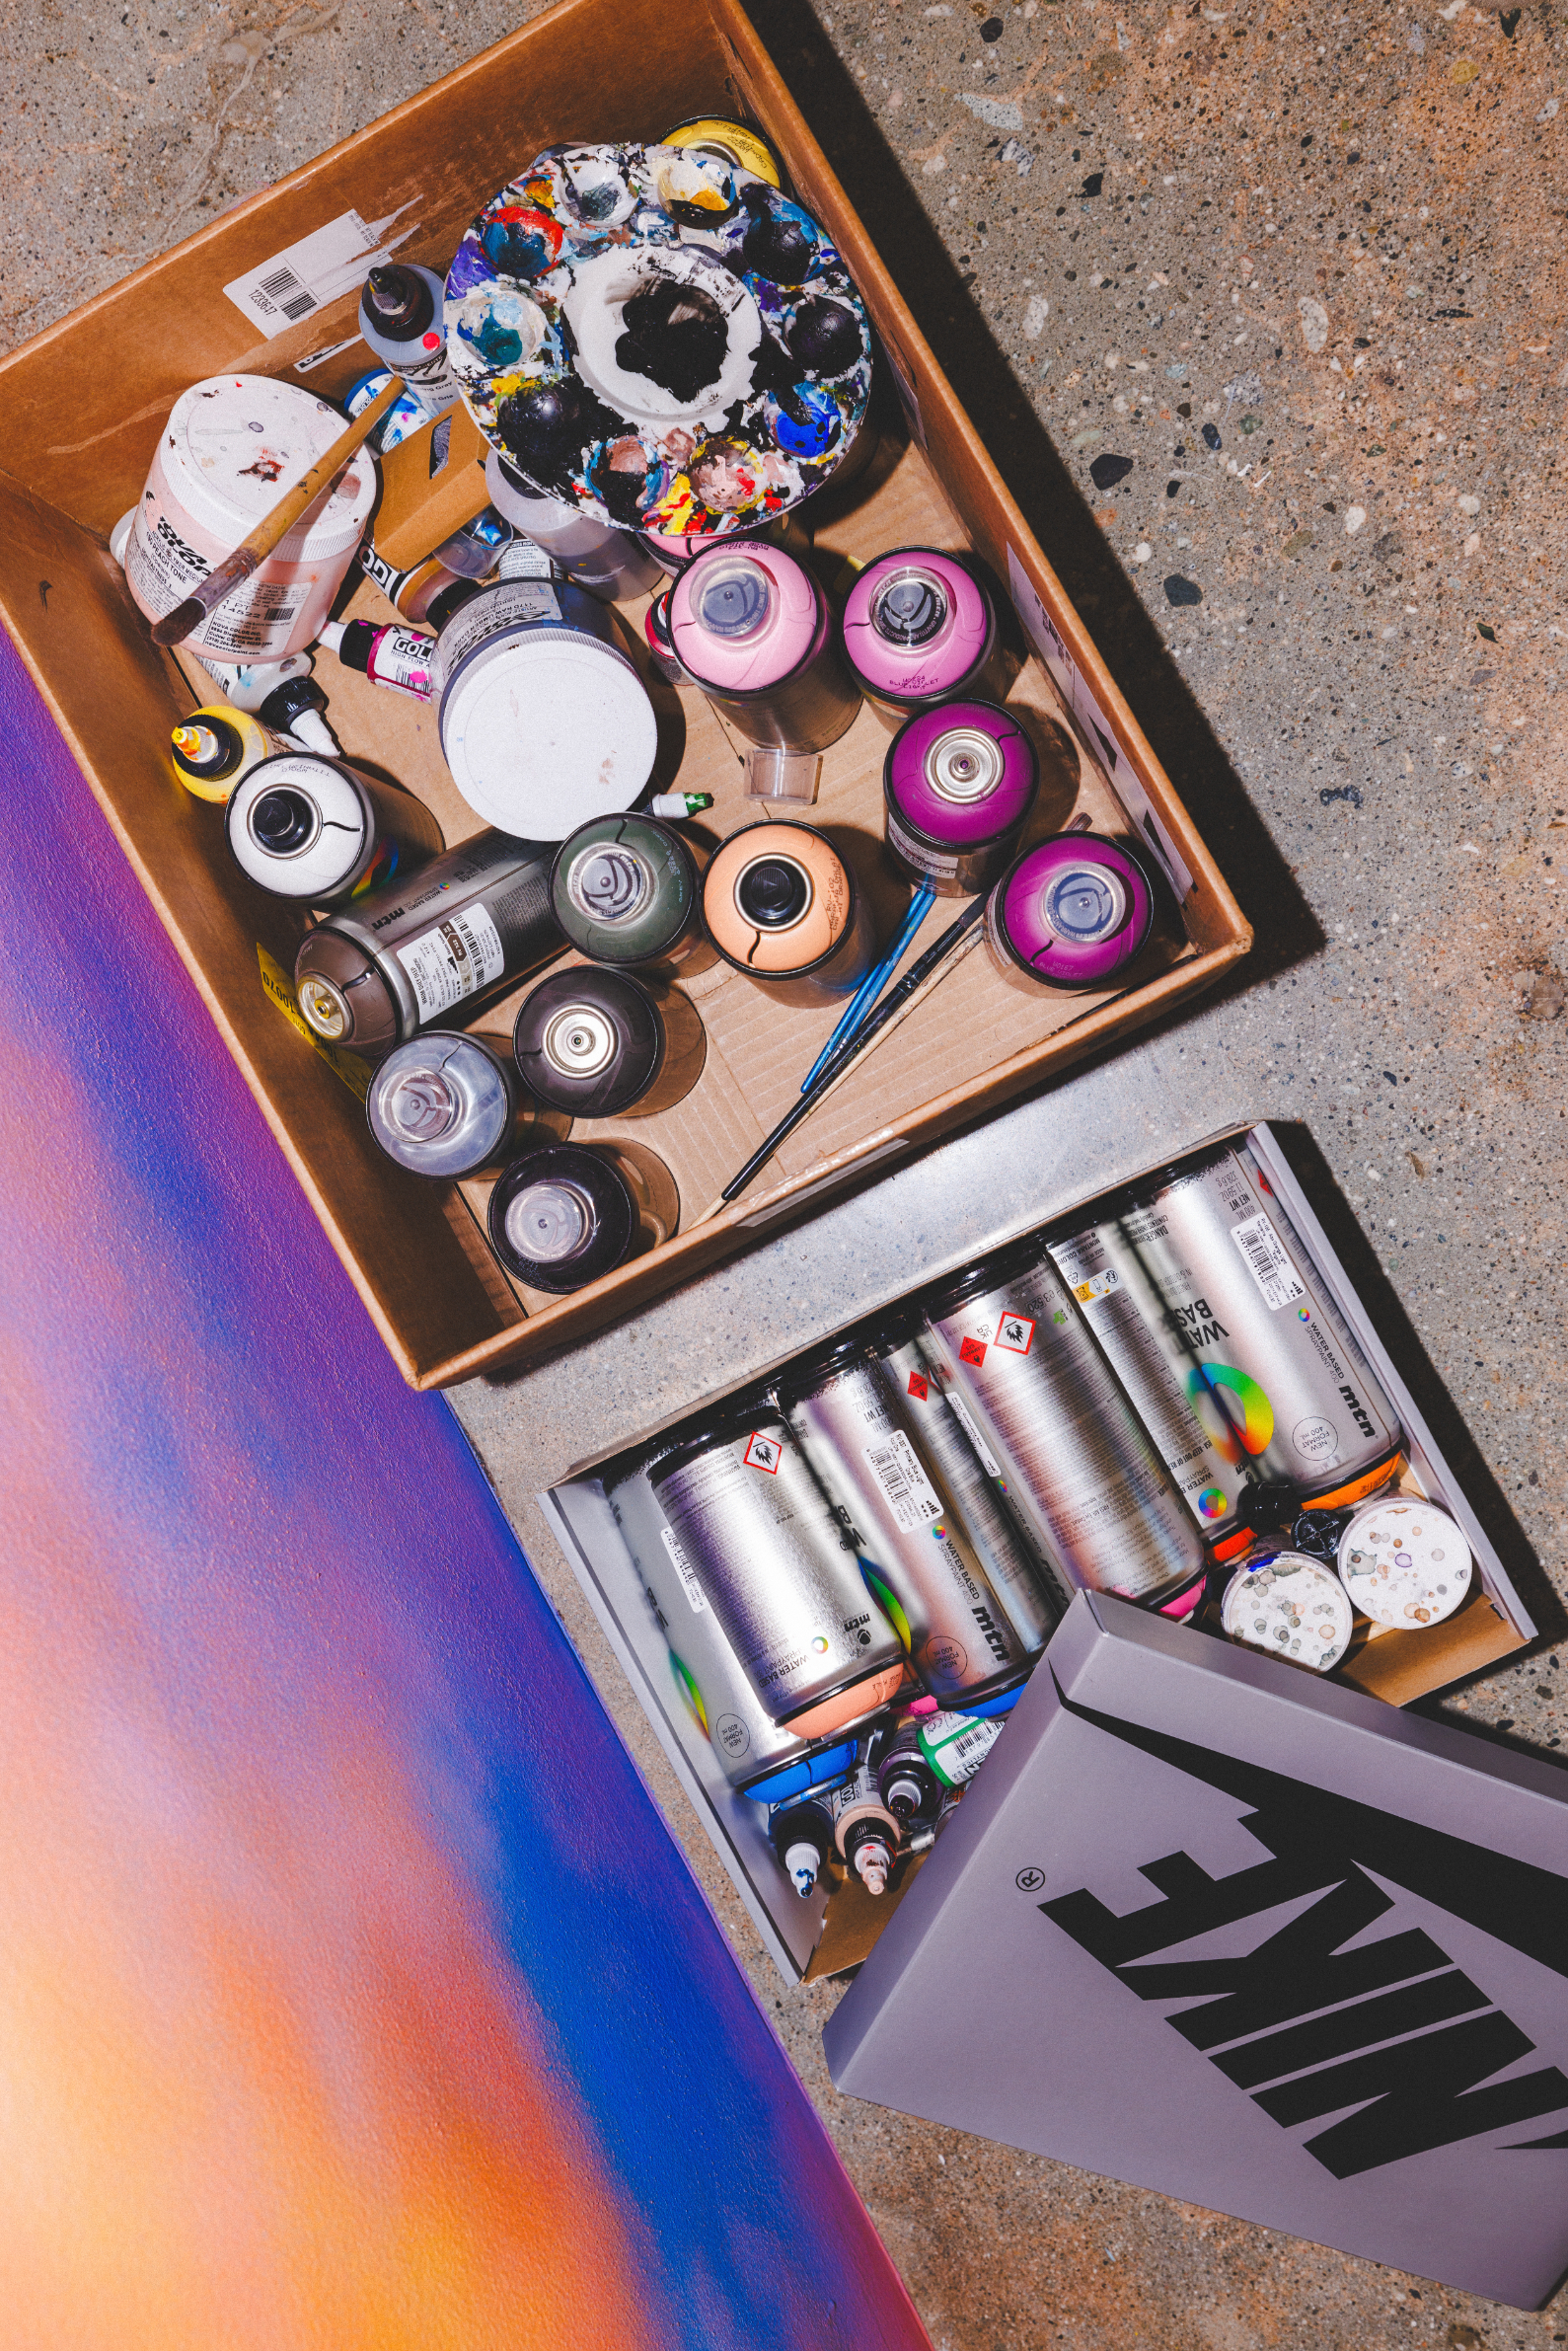 A box of various spray paint cans next to a painted sneaker and graffiti artwork